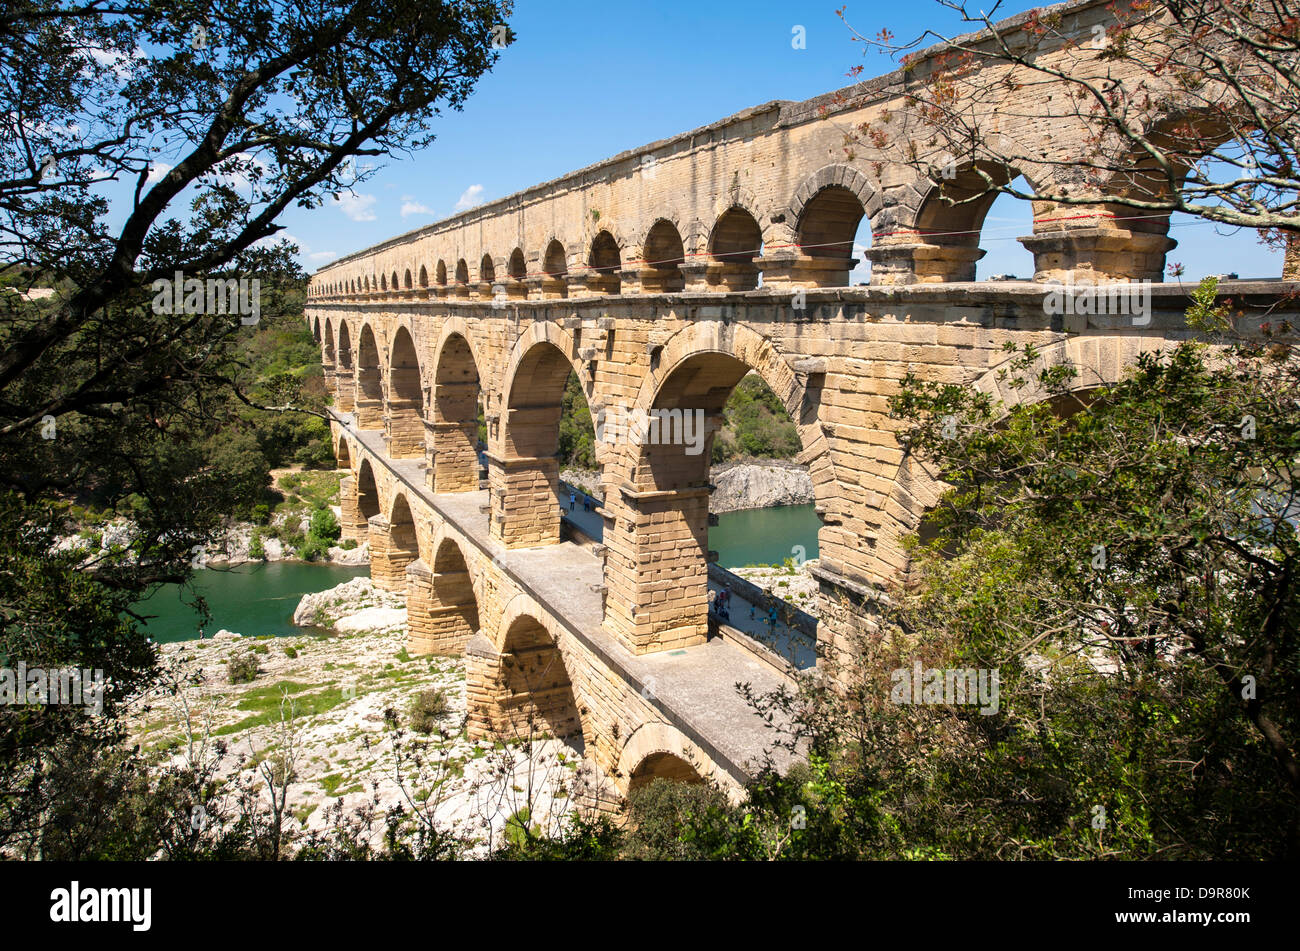 Detail of UNESCO World Heritage Pont du Gard, a Roman aqueduct spanning the Gardon river in southern France Stock Photo